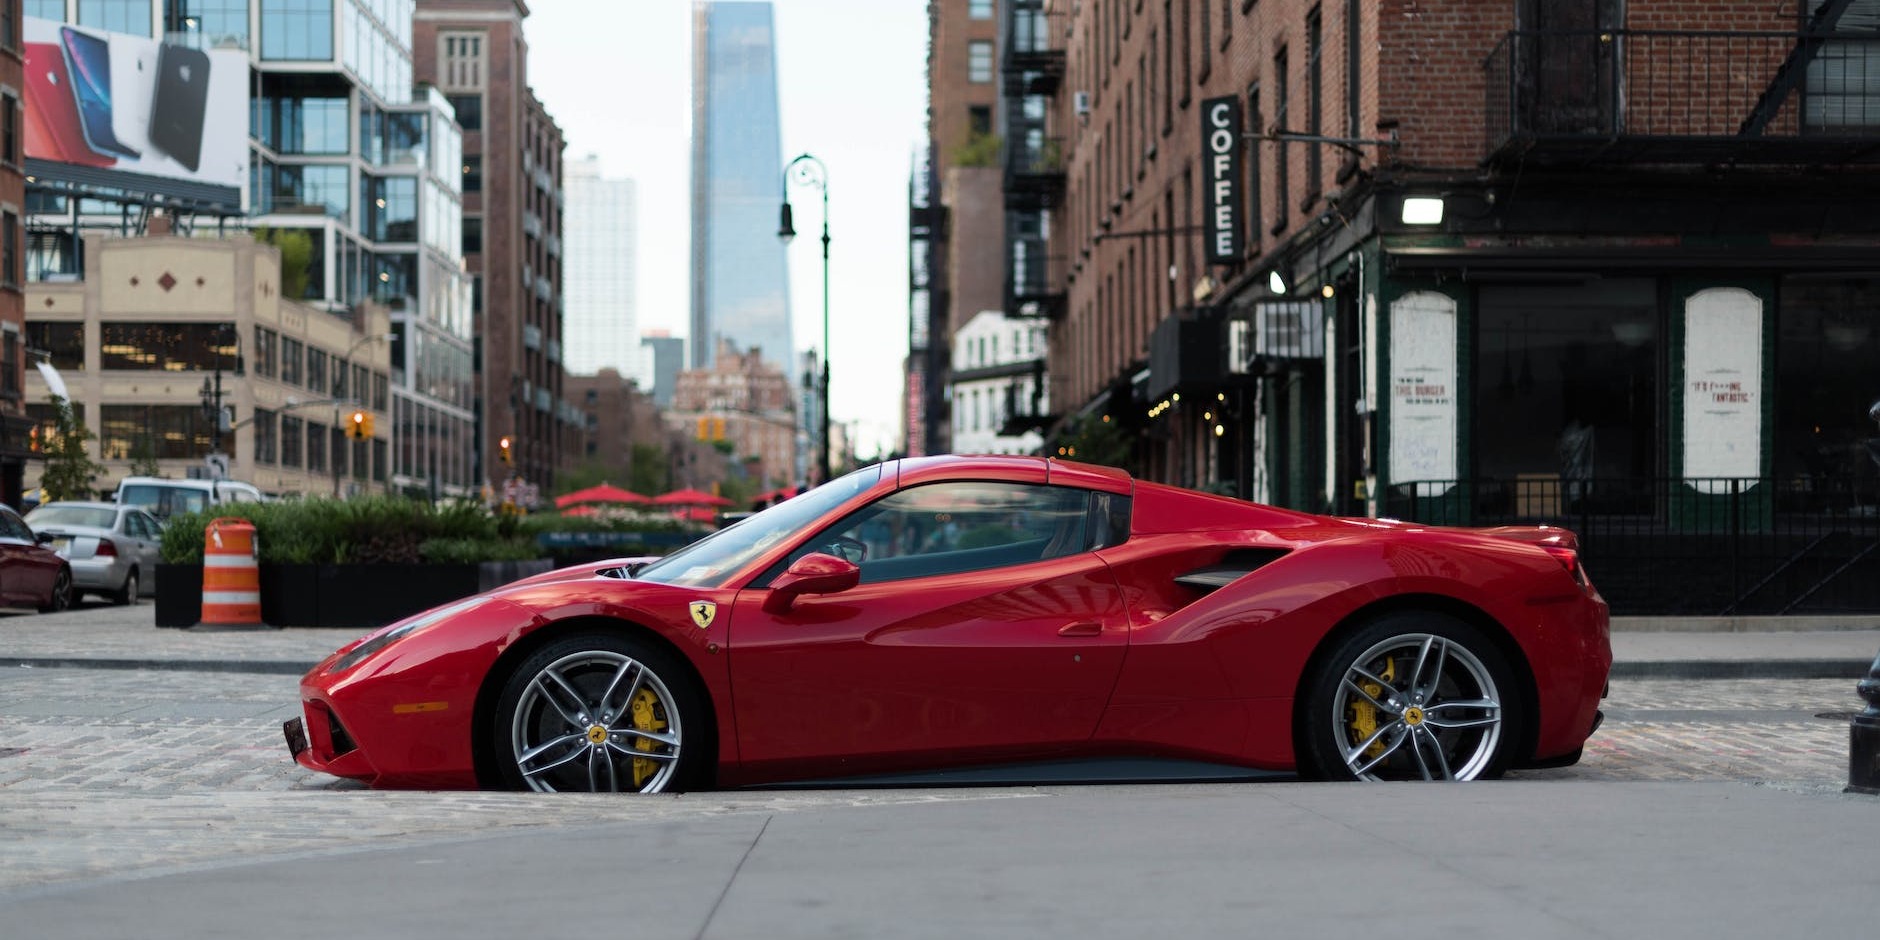 Top Tips for Maintaining Your Ferrari: A UK Guide